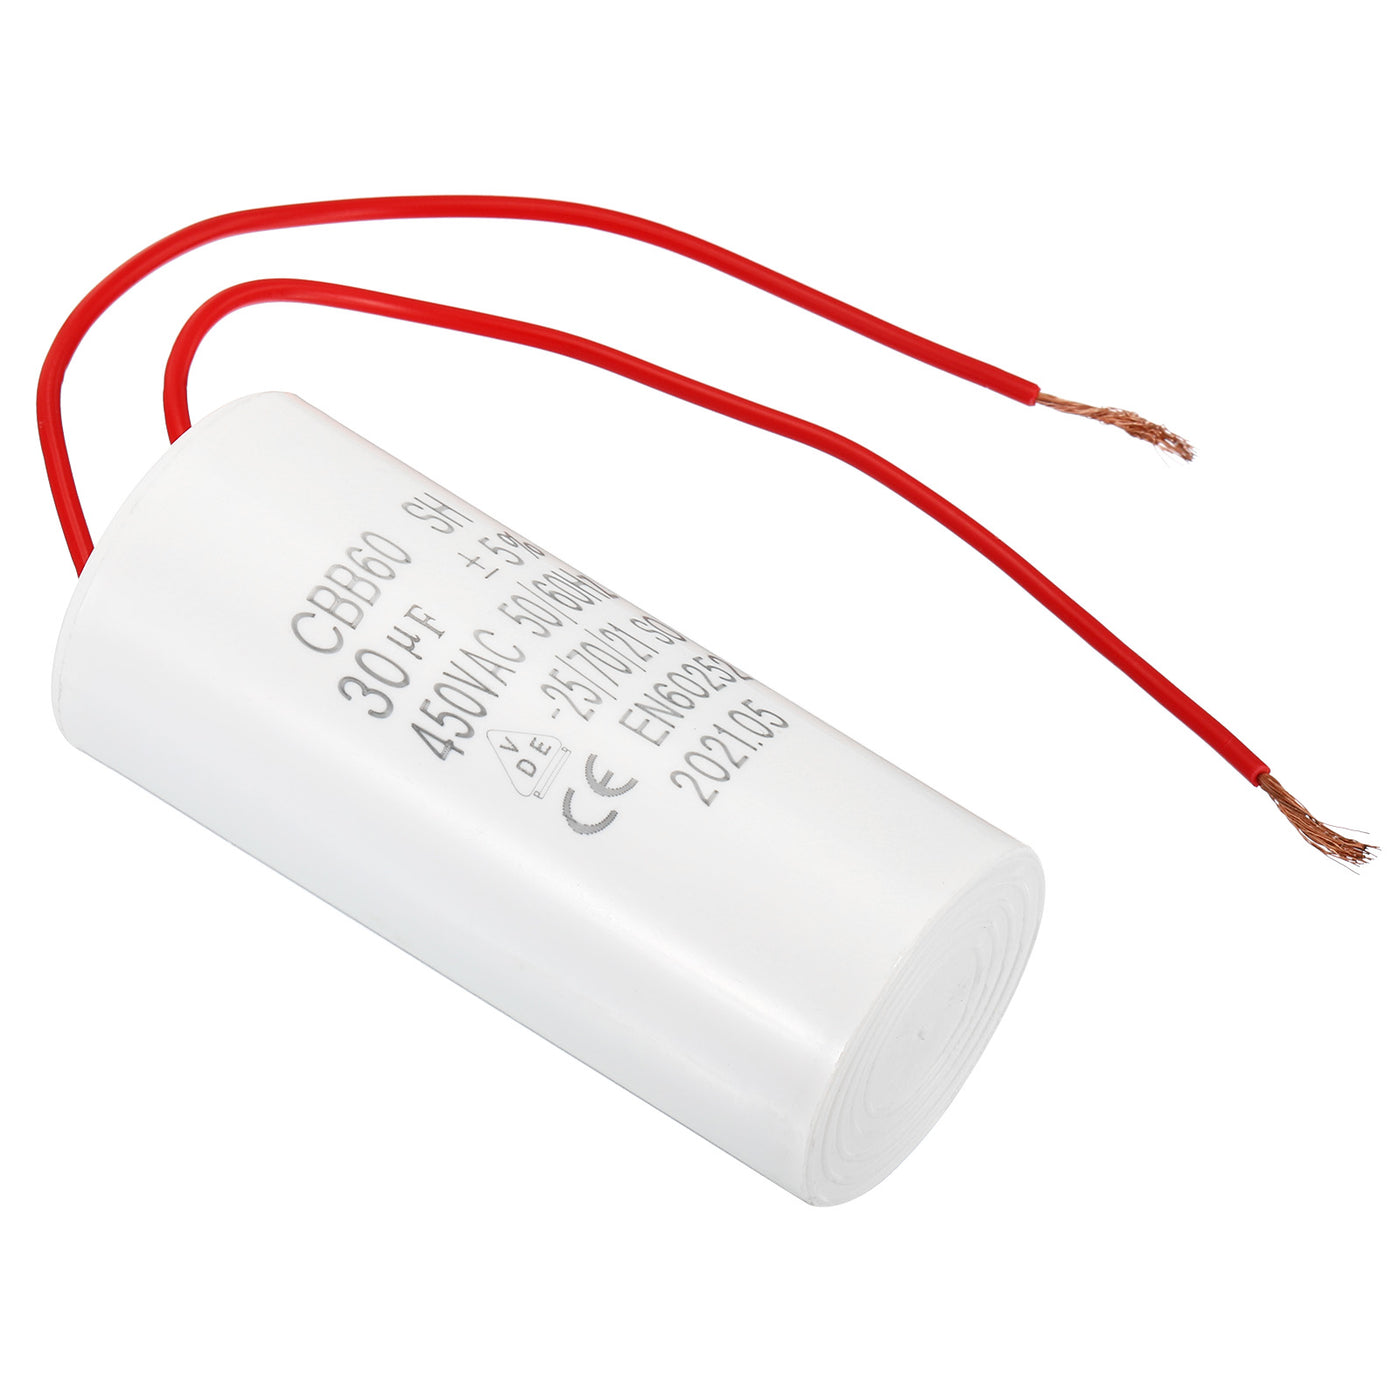 Harfington CBB60 30uF Running Capacitor,AC 450V 50/60Hz with 2 Wires 12cm for Water Pump